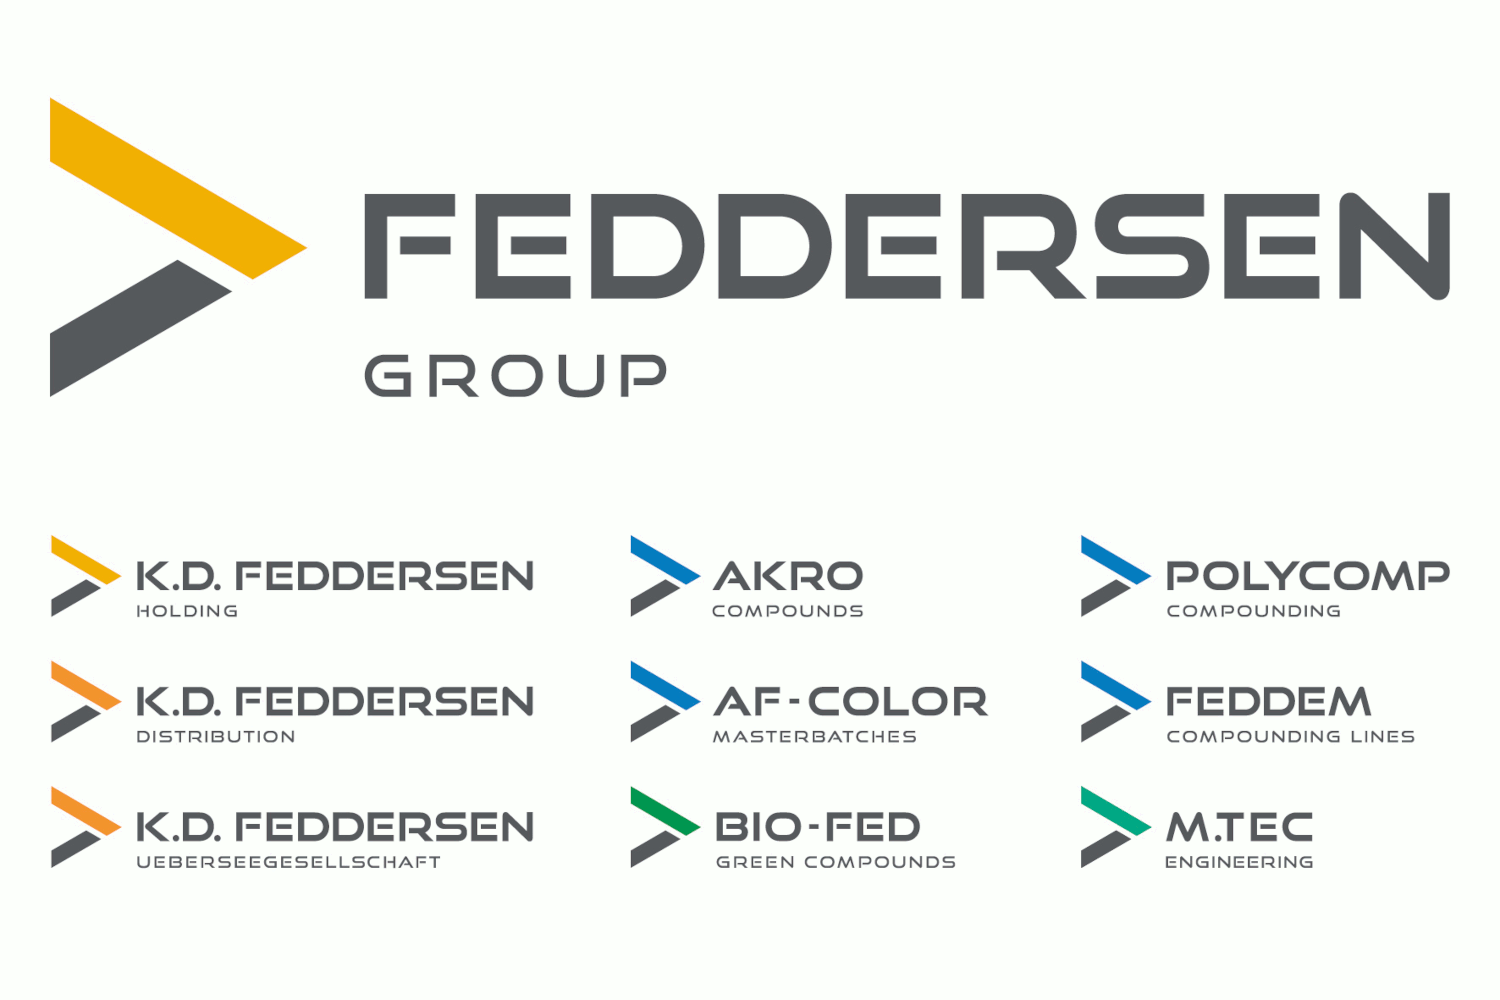 Feddersen Group launches new corporate design